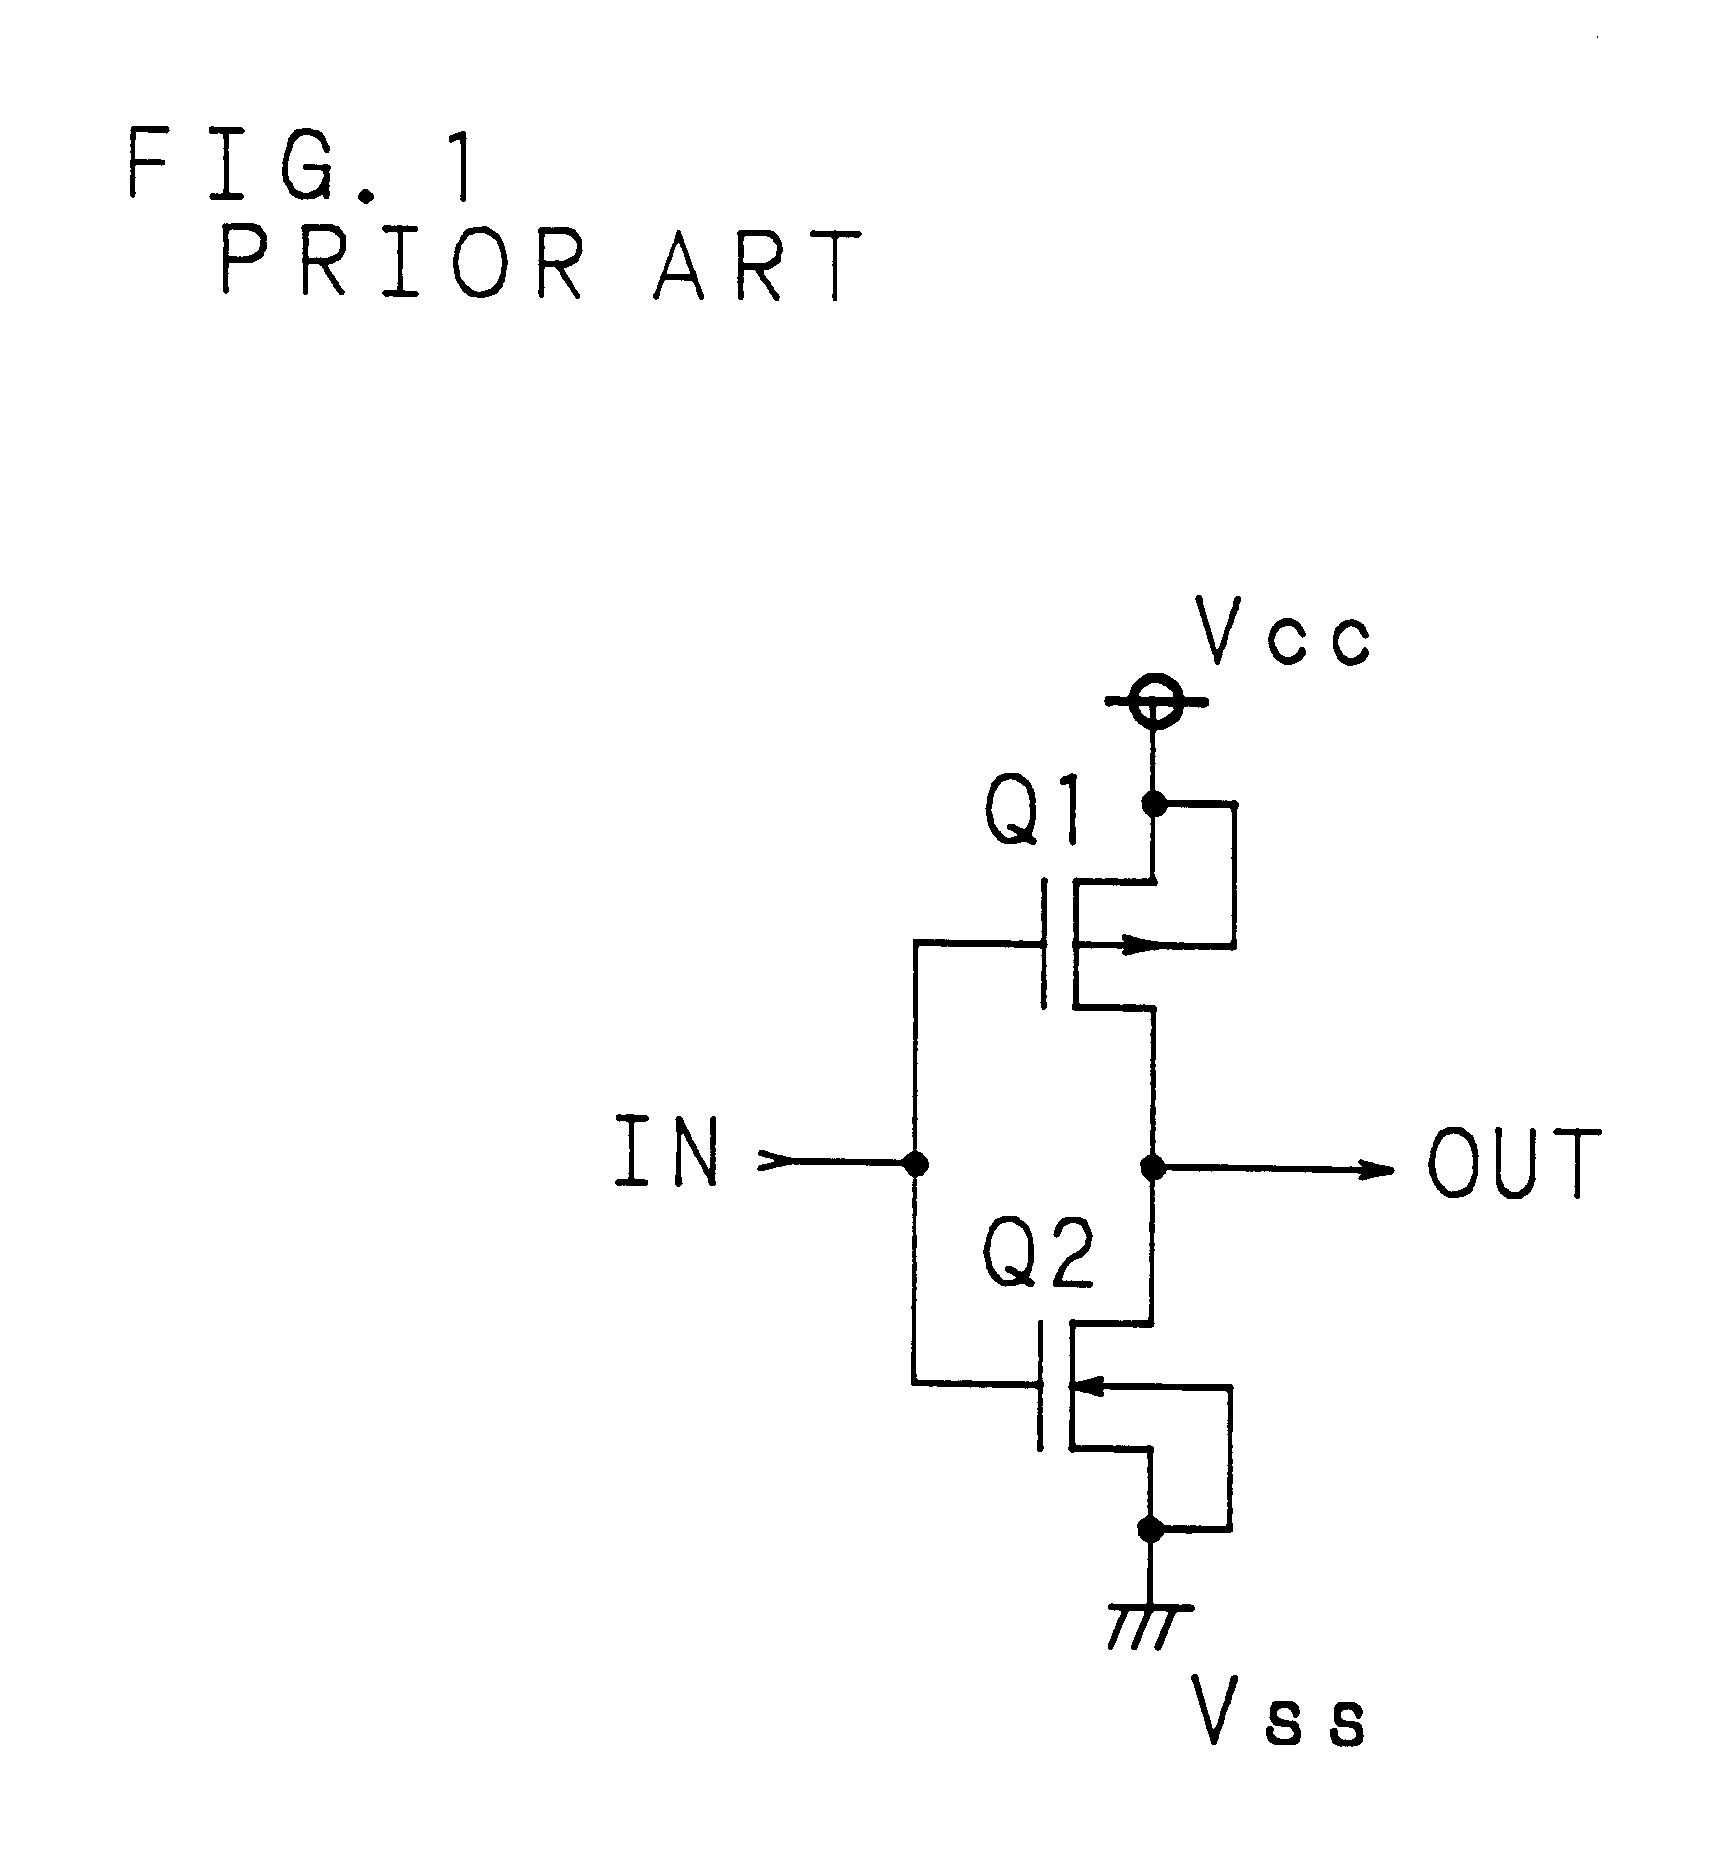 Switched backgate bias for FET